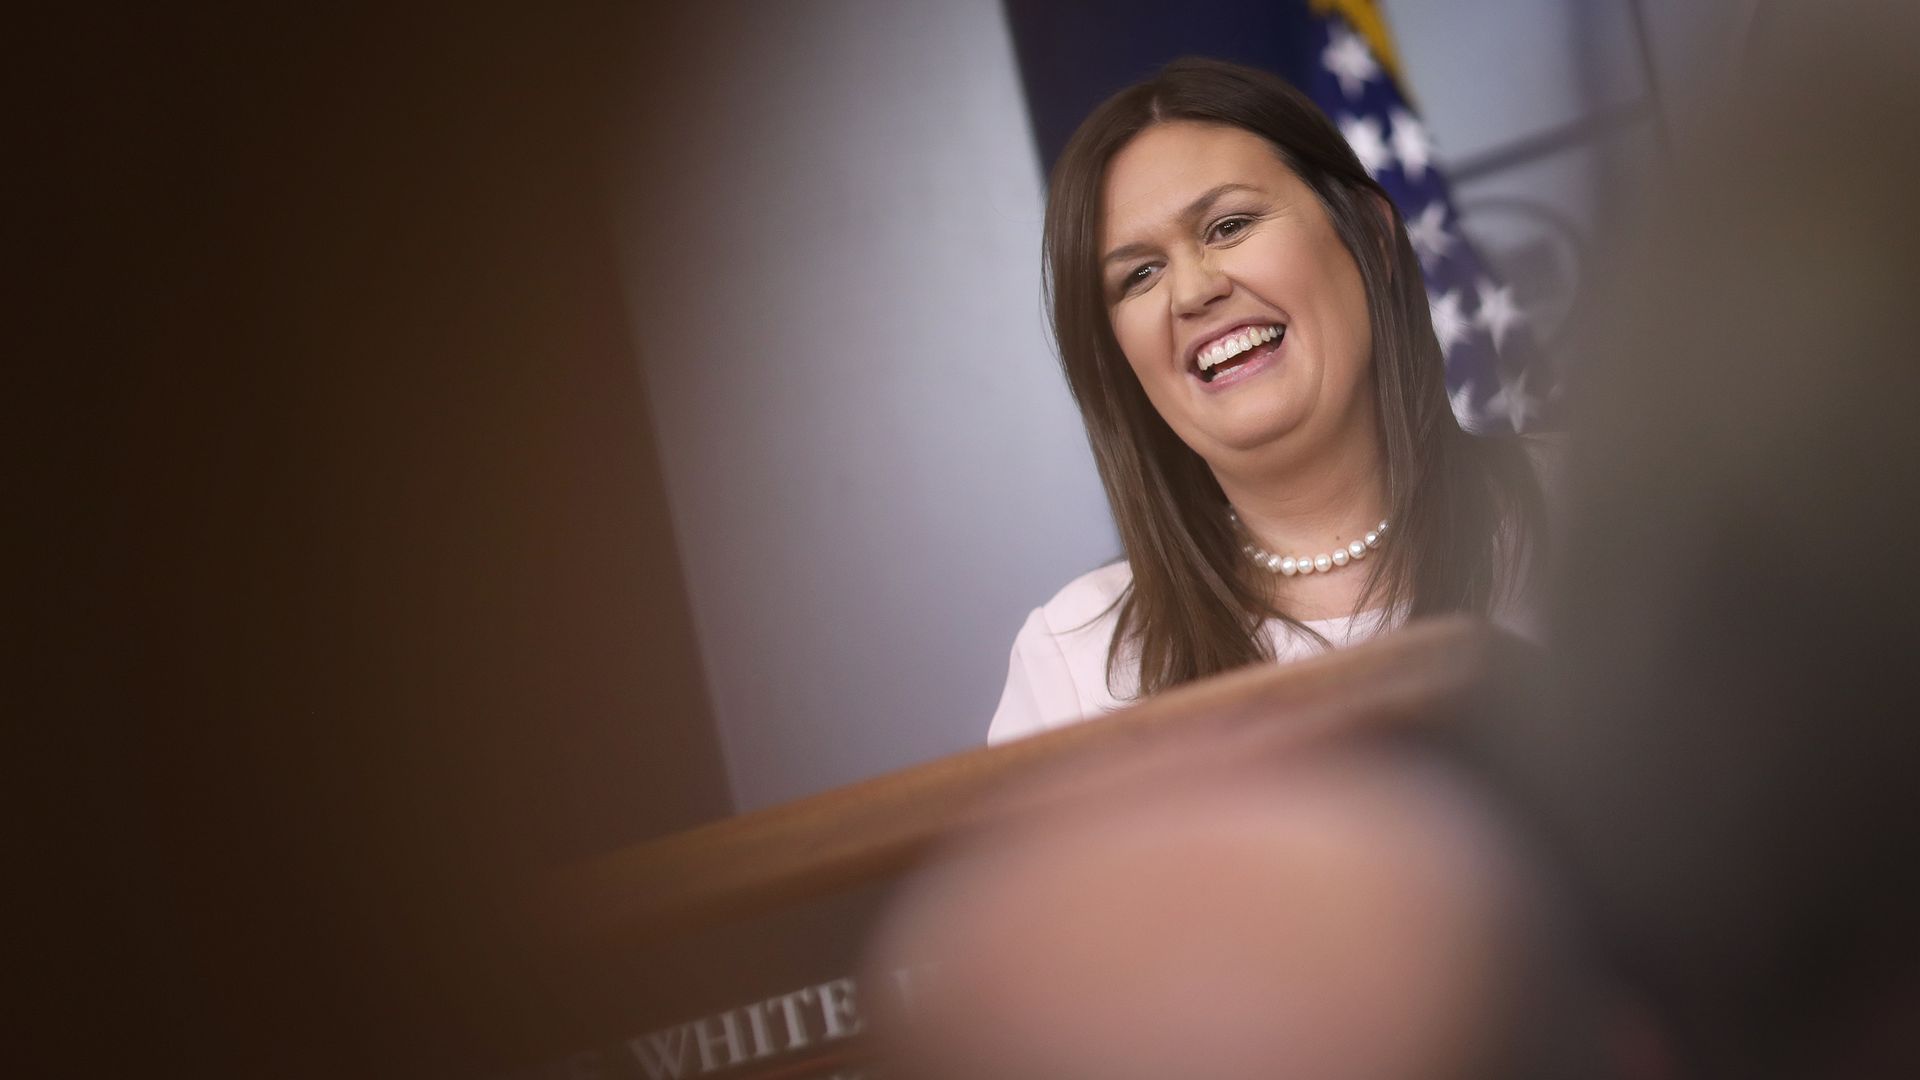 Sarah Sanders laughing from the podium through a blur of raised hands of reporters